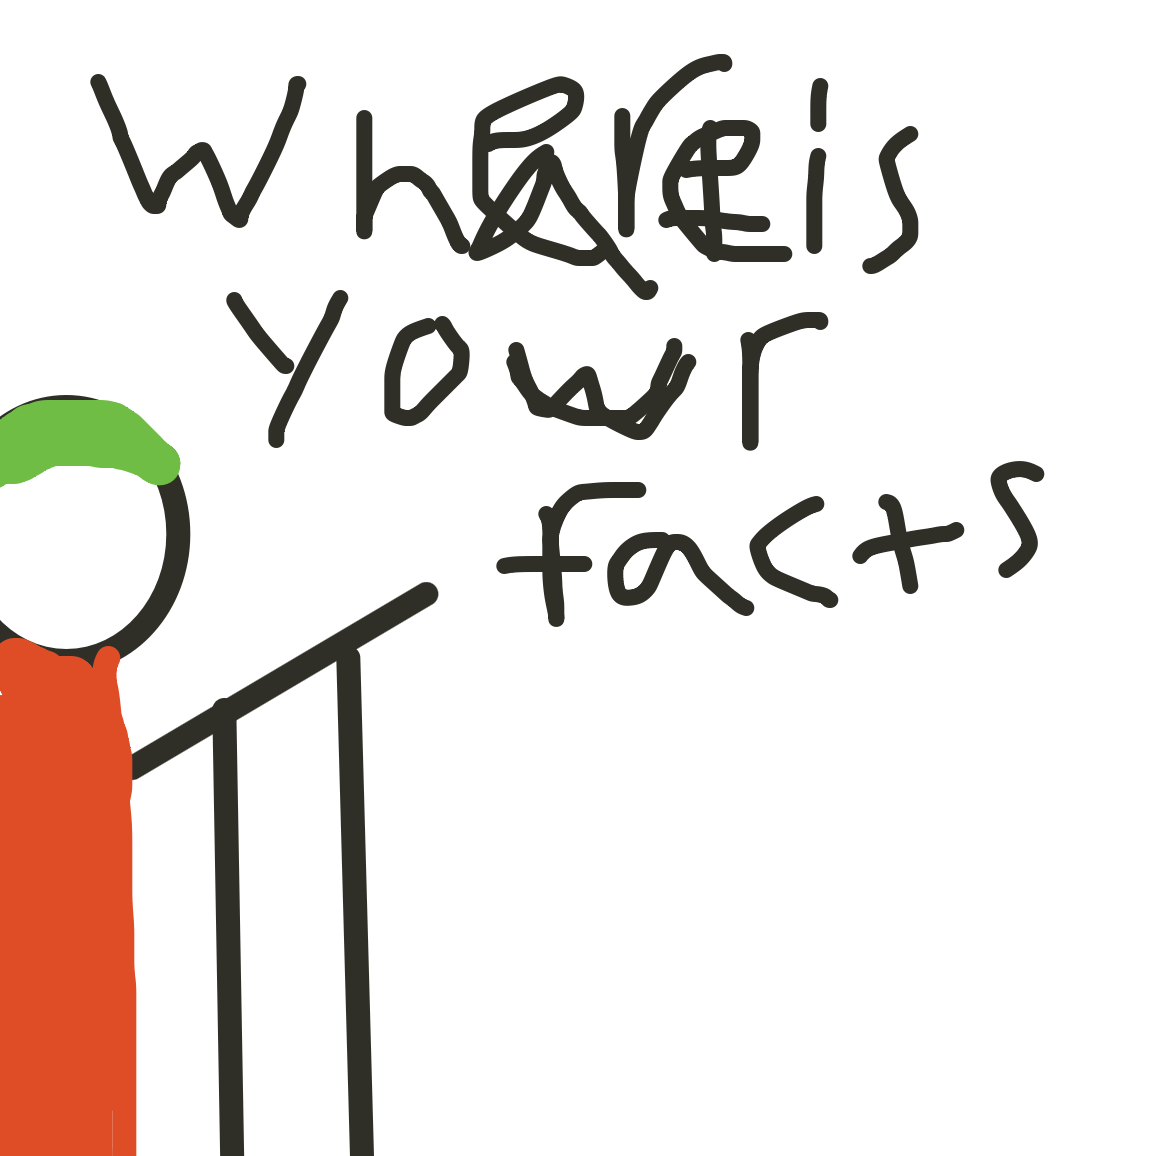 But what are your facts maam - Online Drawing Game Comic Strip Panel by Nonexistent 